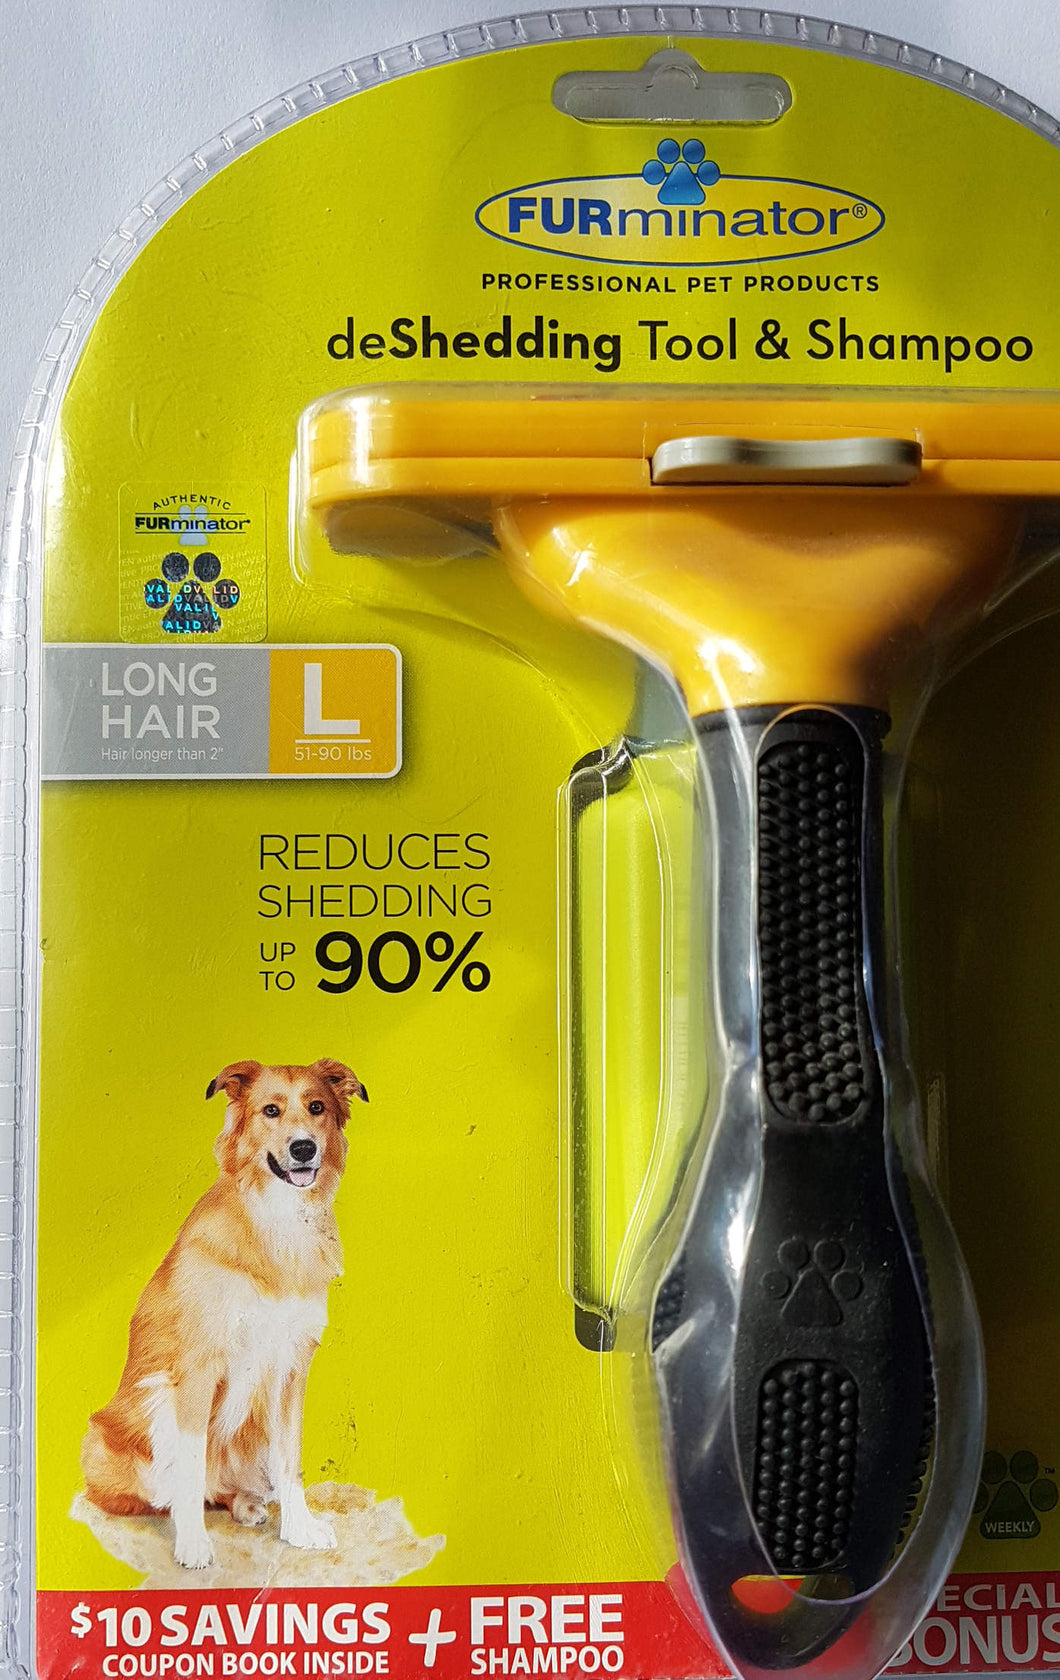 Furminator deShedding Tool (for dogs with long hair)